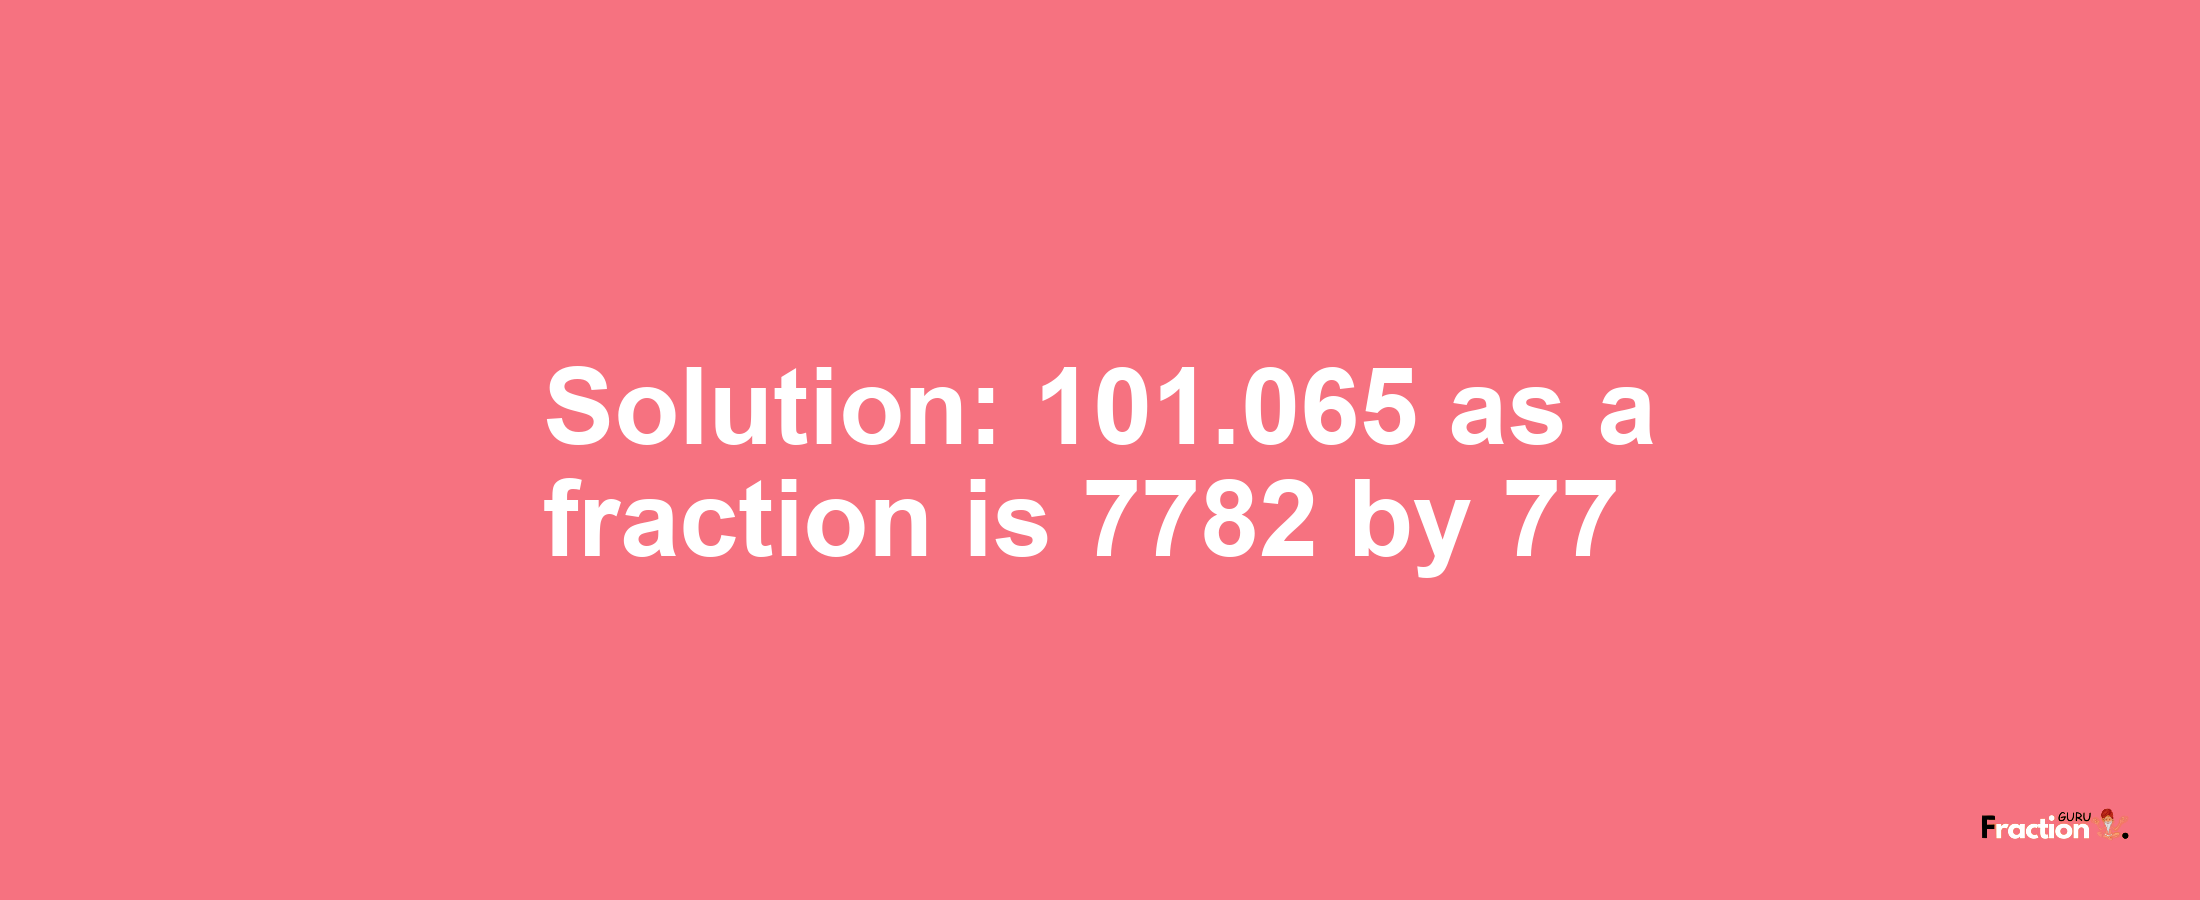 Solution:101.065 as a fraction is 7782/77